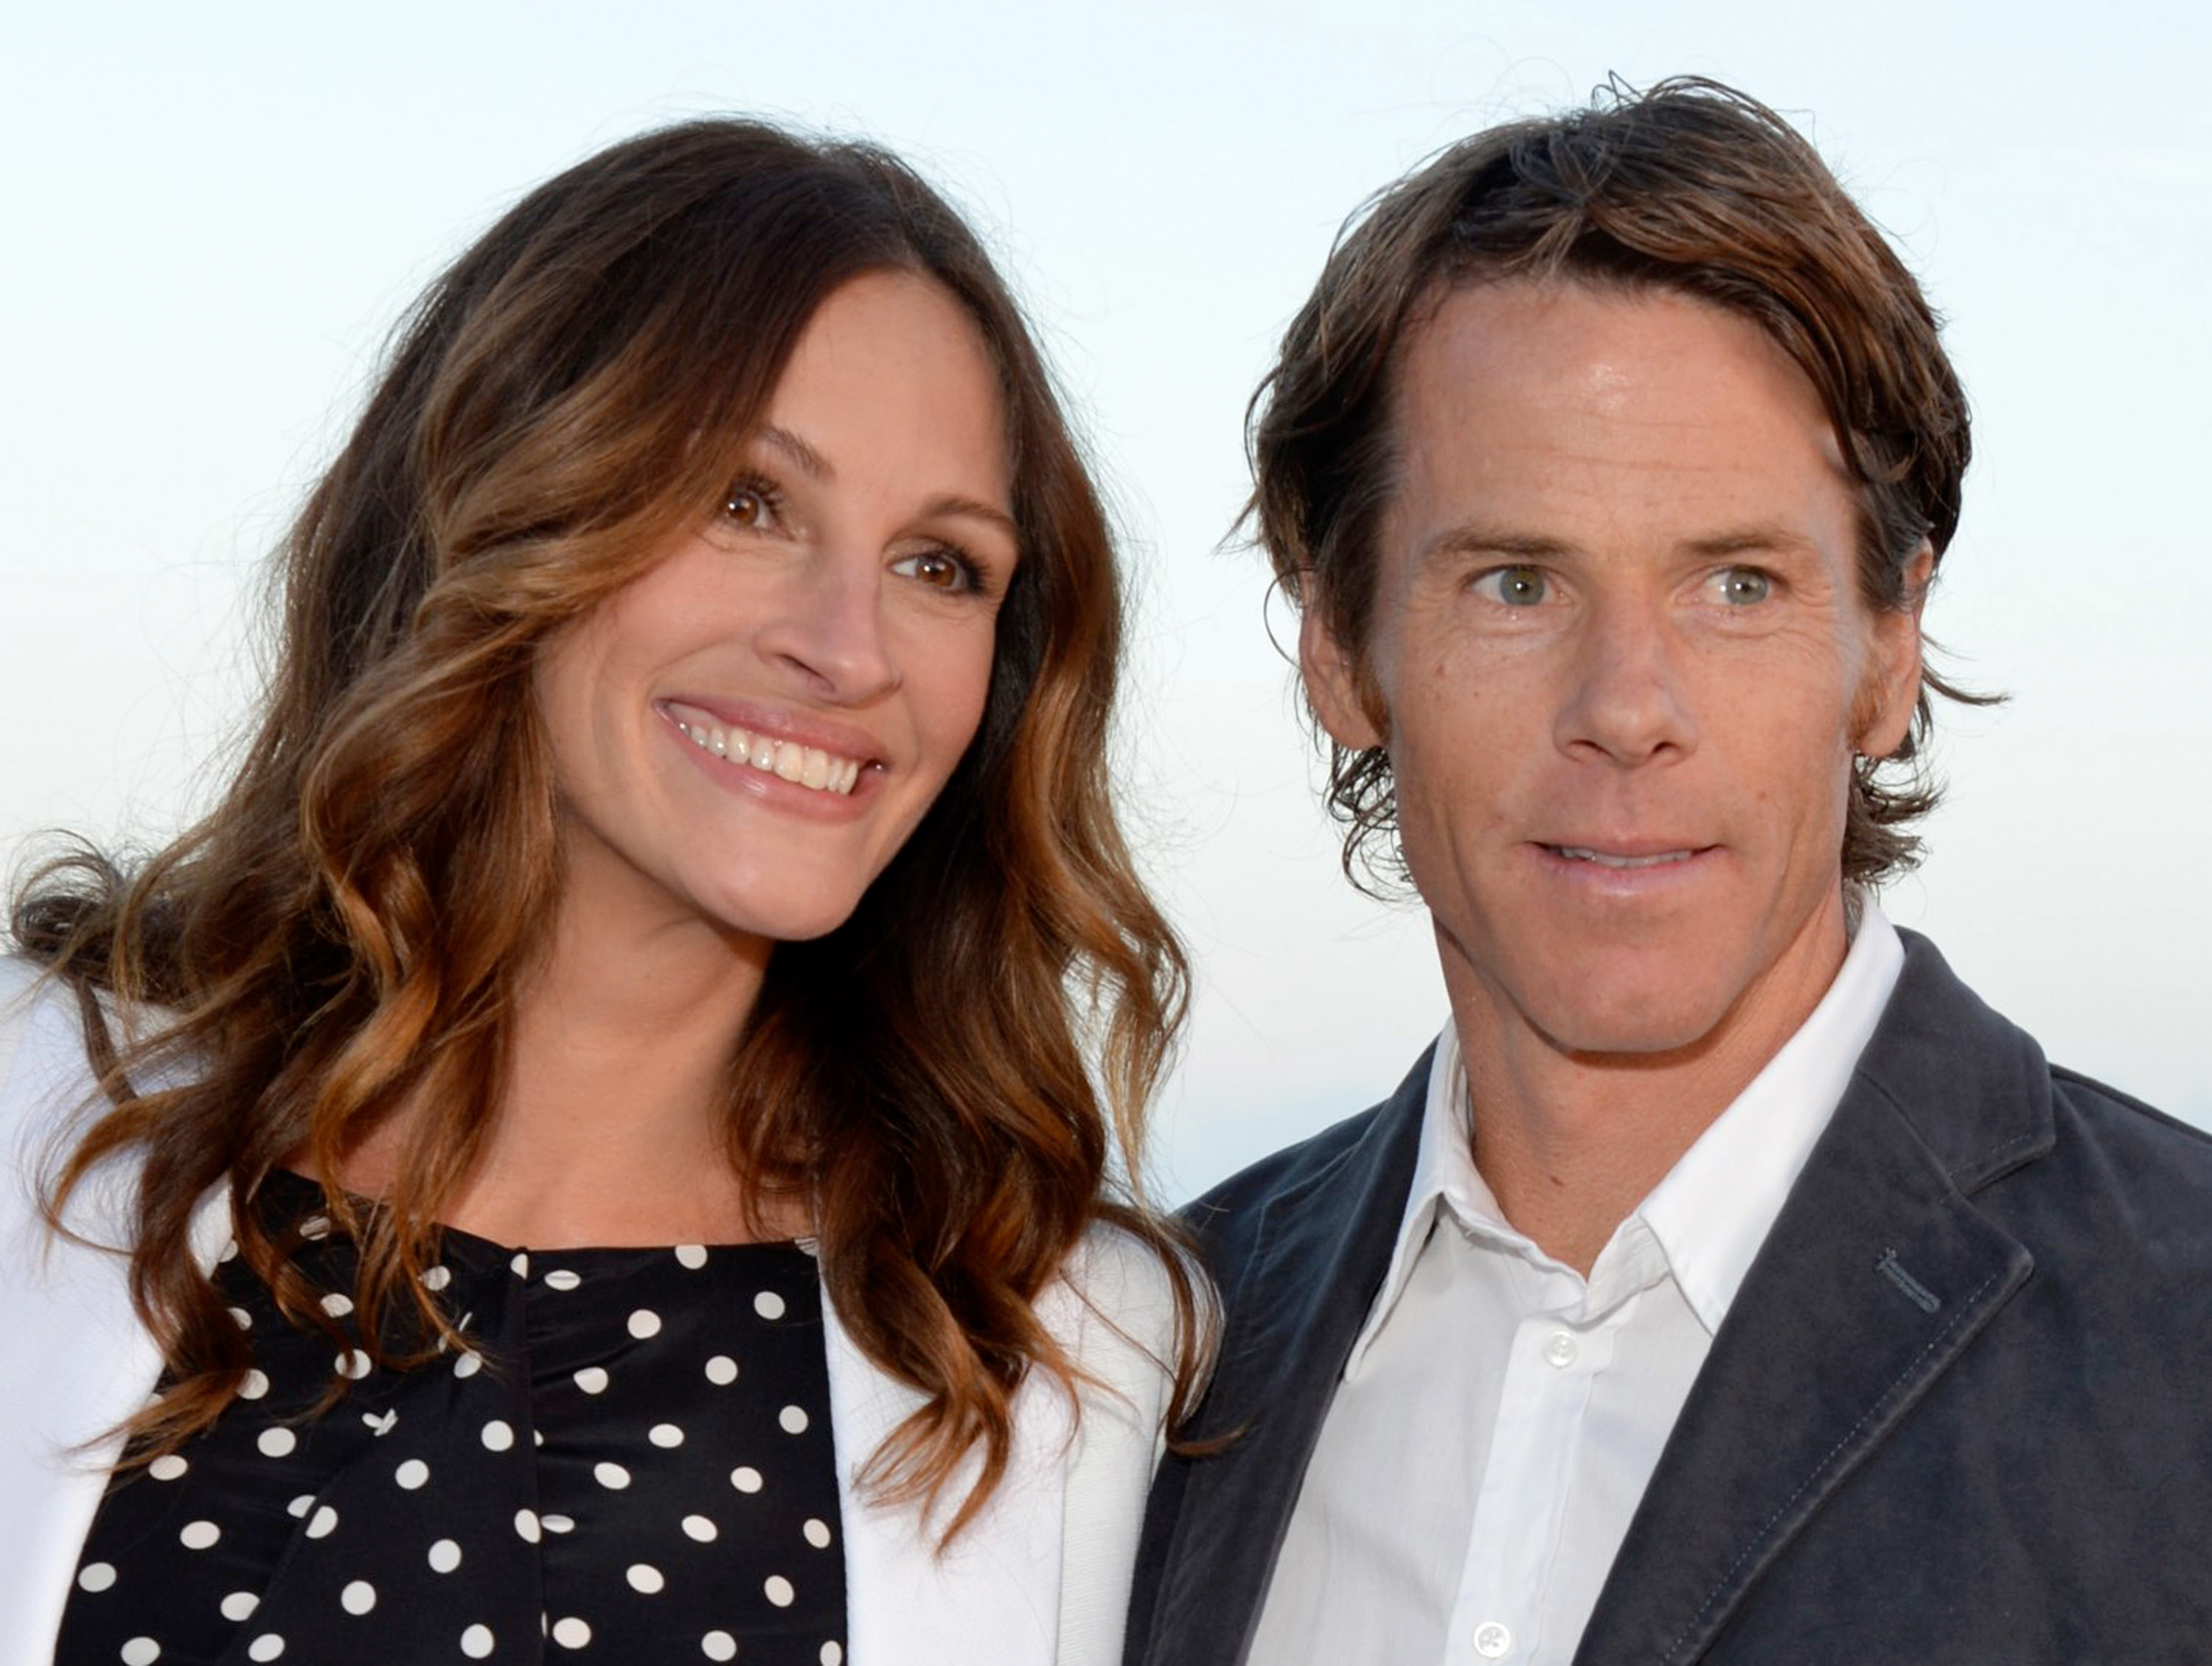 Julia Roberts in a polkadot dress and Daniel Moder in 2012 posing for the camera